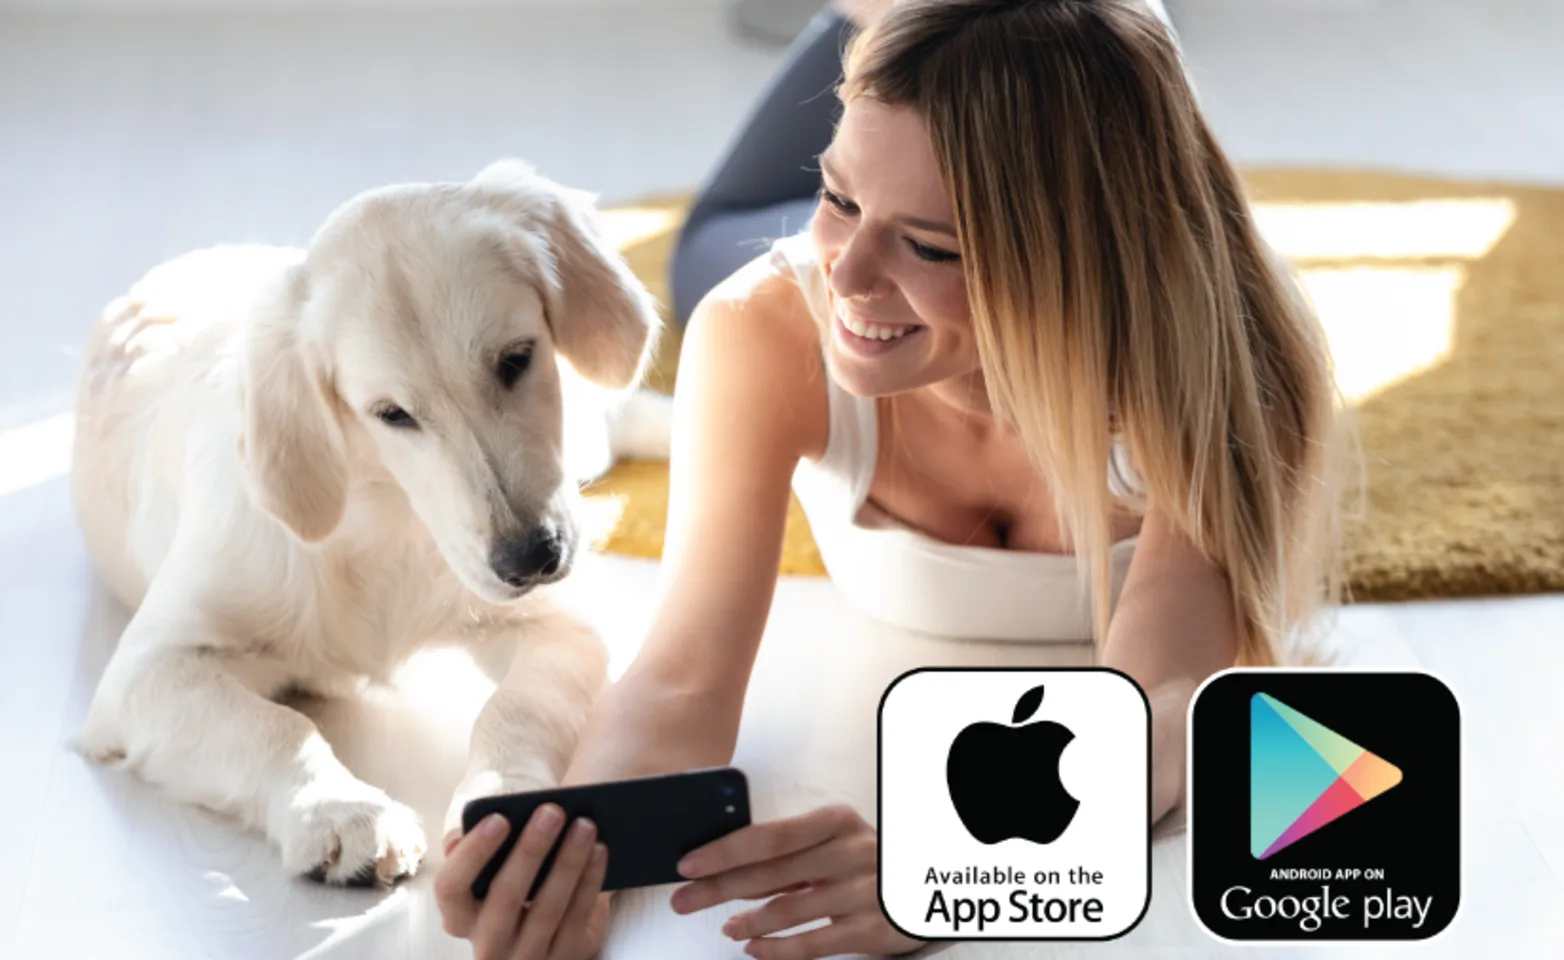 Women on phone with dog next to her with App Store and Google Play logos